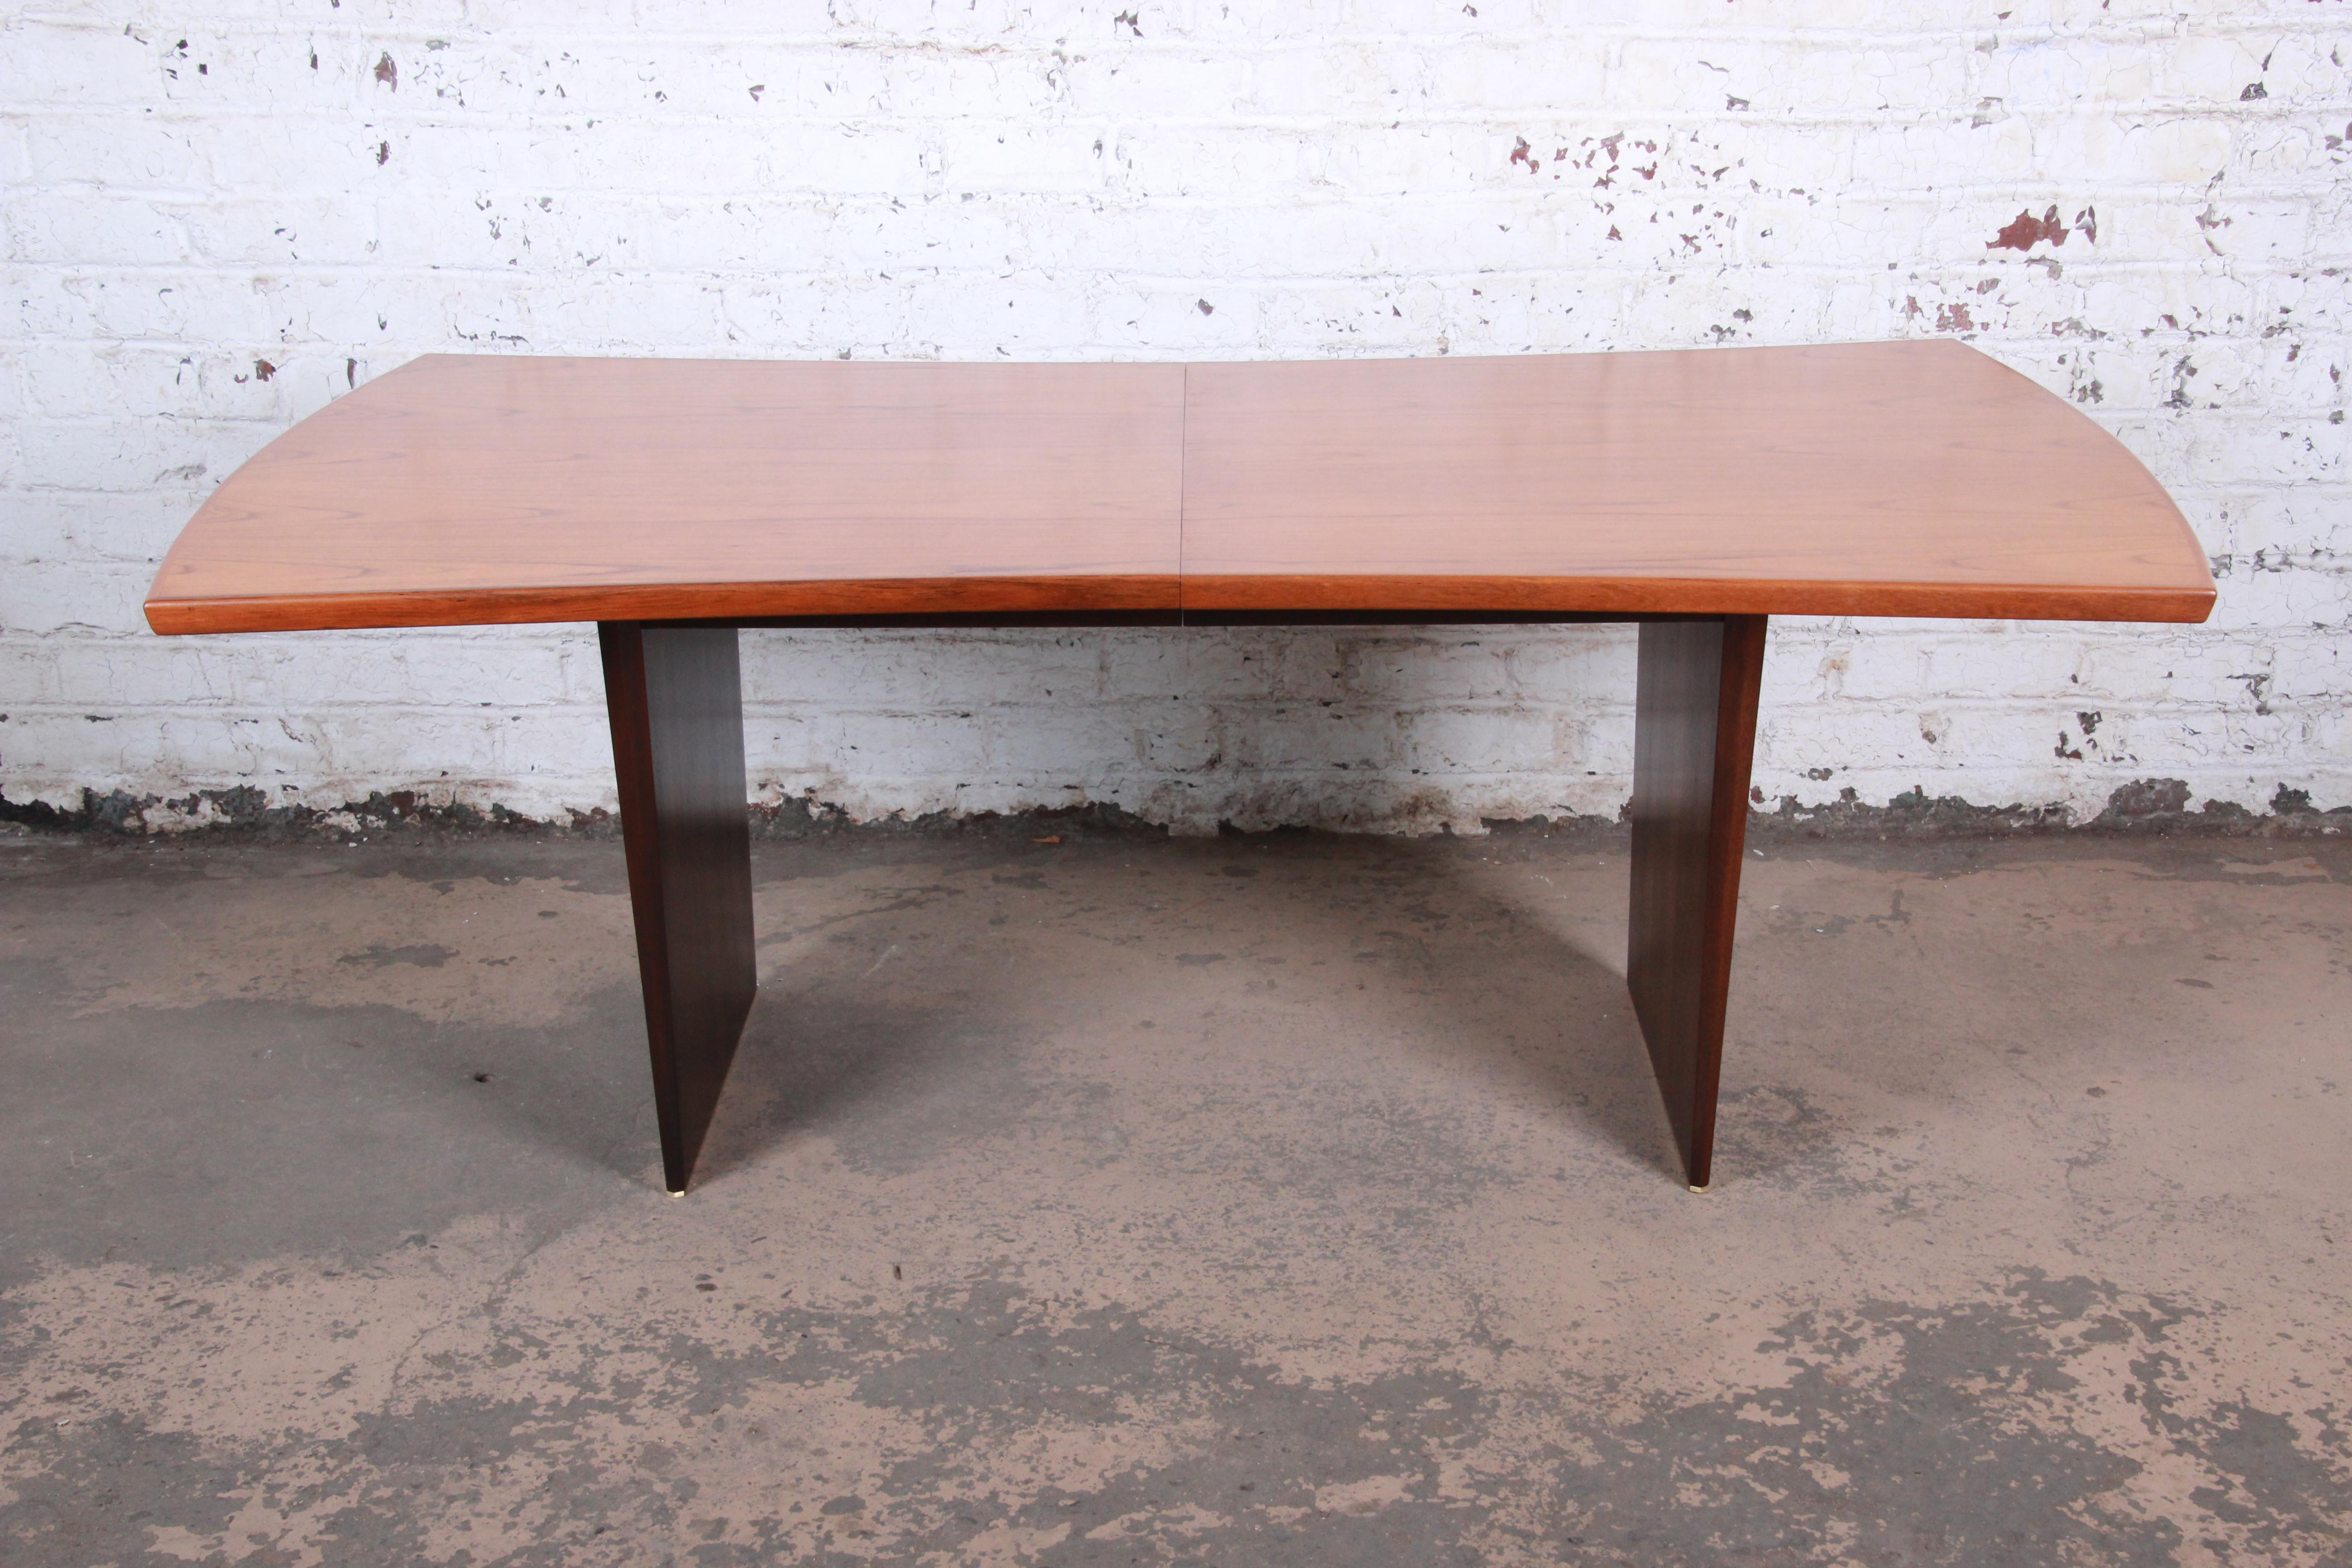 An exceptional Mid-Century Modern teak and walnut bow tie dining table designed by Harvey Probber. The table features a gorgeous teak wood top in a unique bow tie shape. It has tapered solid walnut slab legs with brass trim. Simple yet elegant in